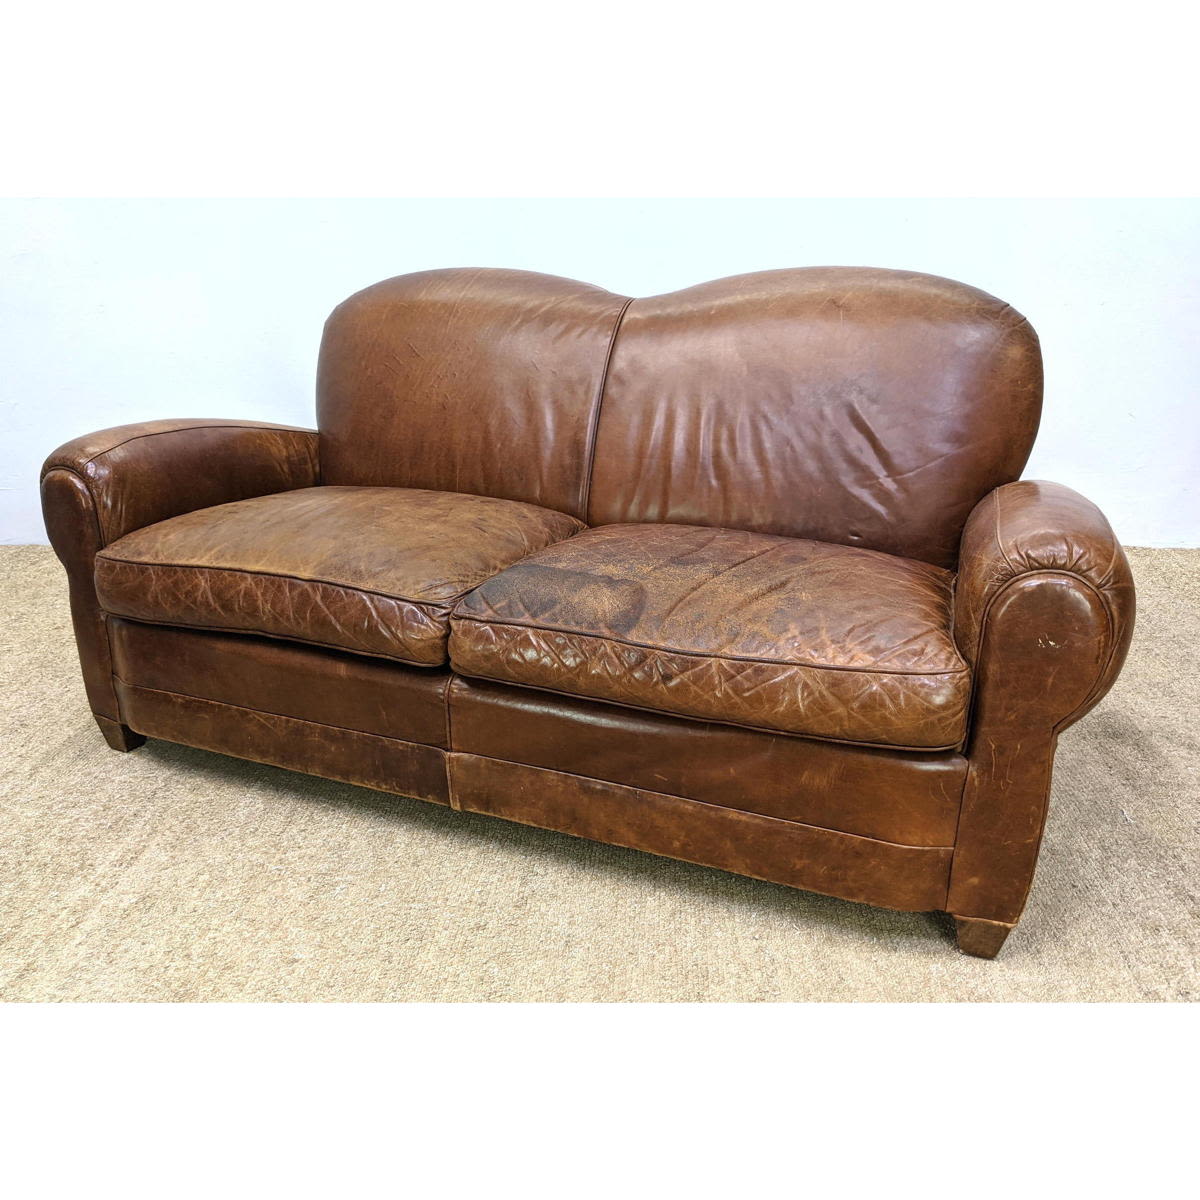 French style Leather Club Sofa